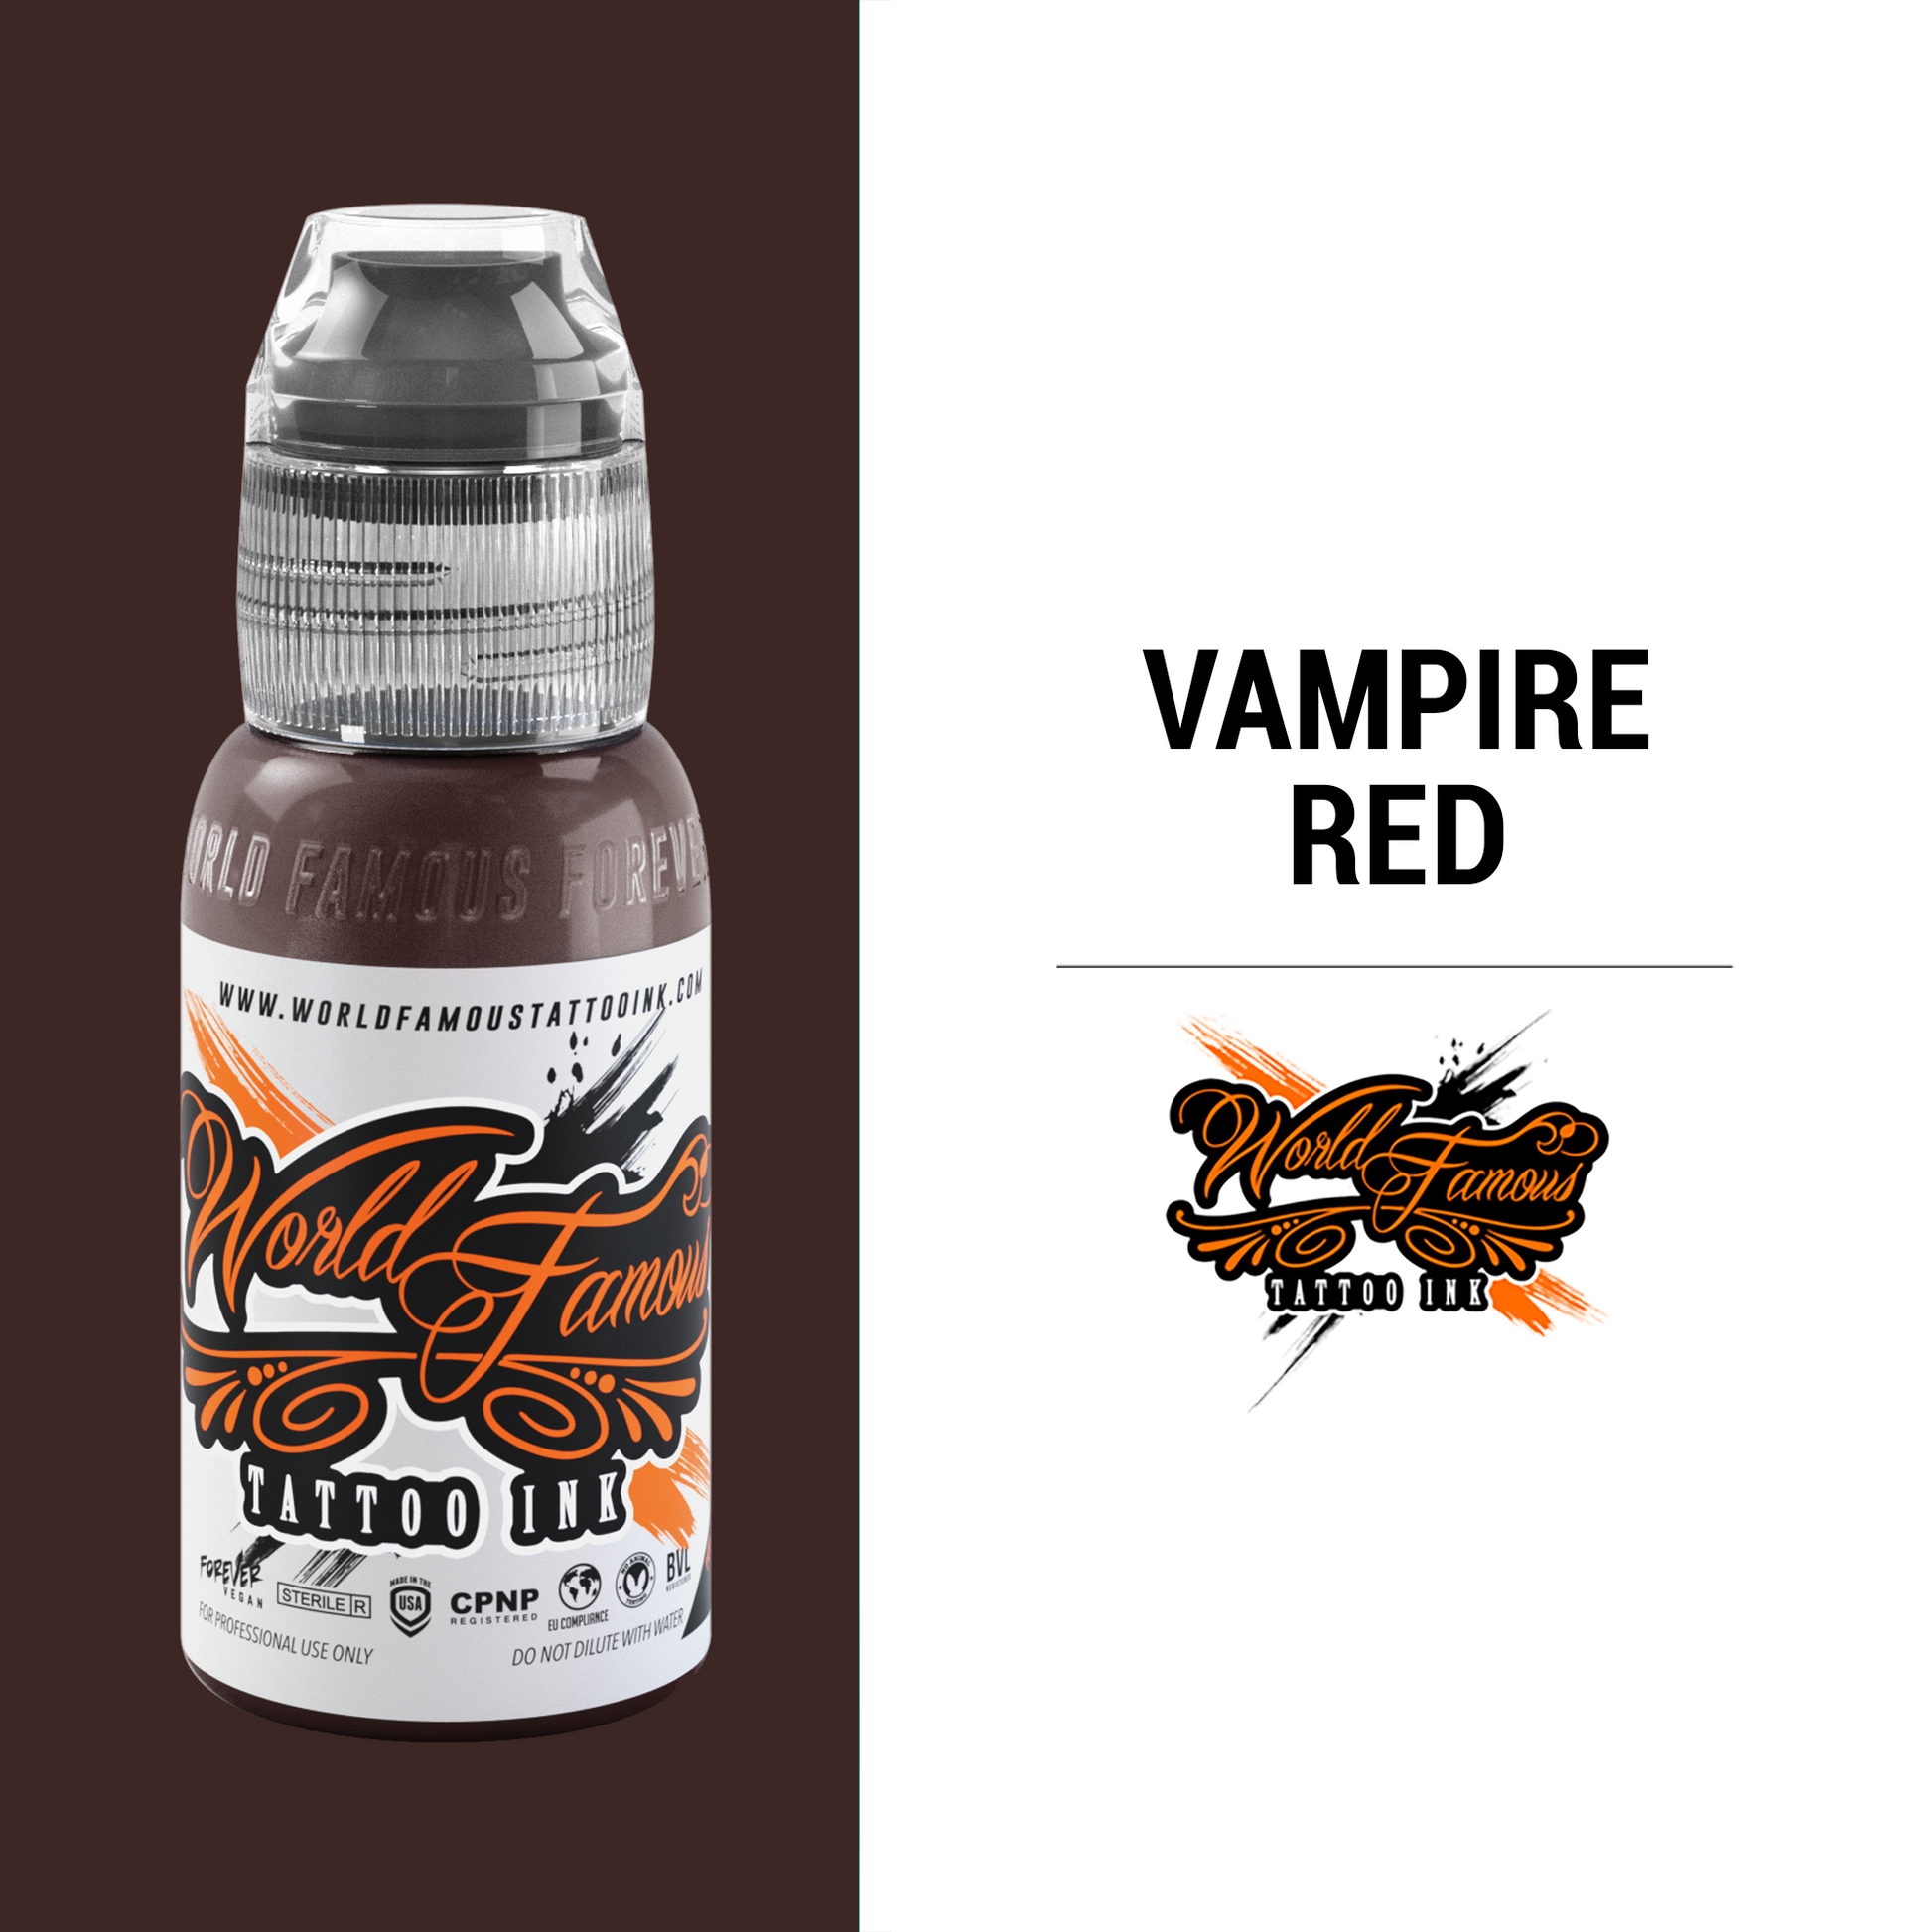 Vampire Red | World Famous Tattoo Ink